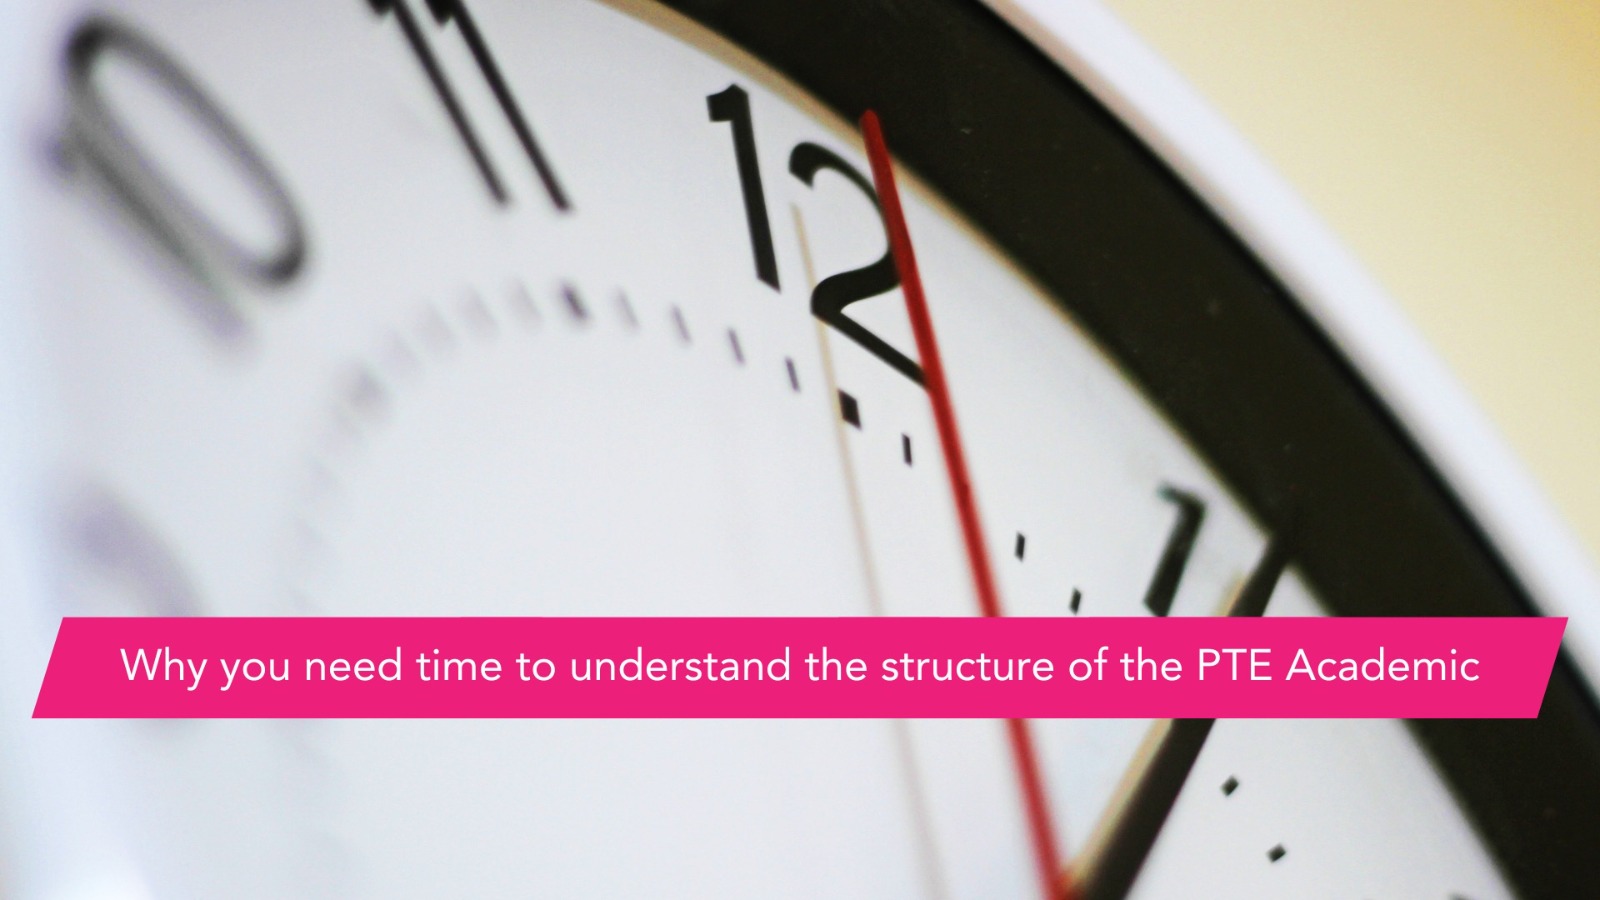 Why do you need time to understand the structure of the PTE Academic?